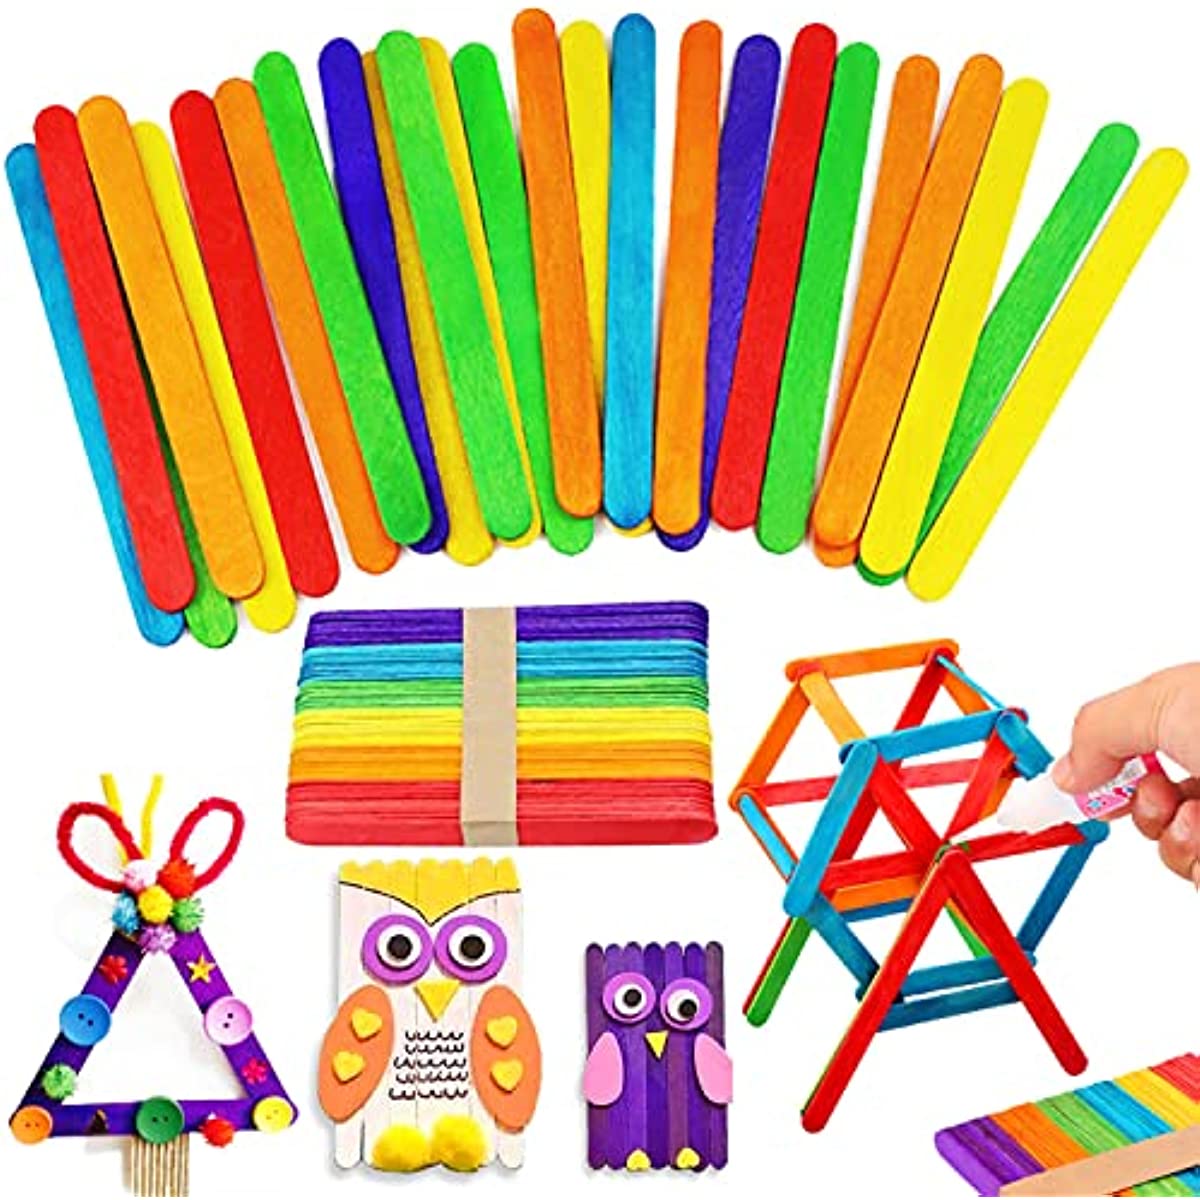  60 Pieces Jumbo Craft Sticks, 8 Inch Natural Wooden Popsicle  Sticks, Multi-Functional Ice Cream Sticks for Crafts, Tongue Depressors,  Hair Removal and Waxing Sticks, Plant Labels, DIY Classroom Crafts : Arts